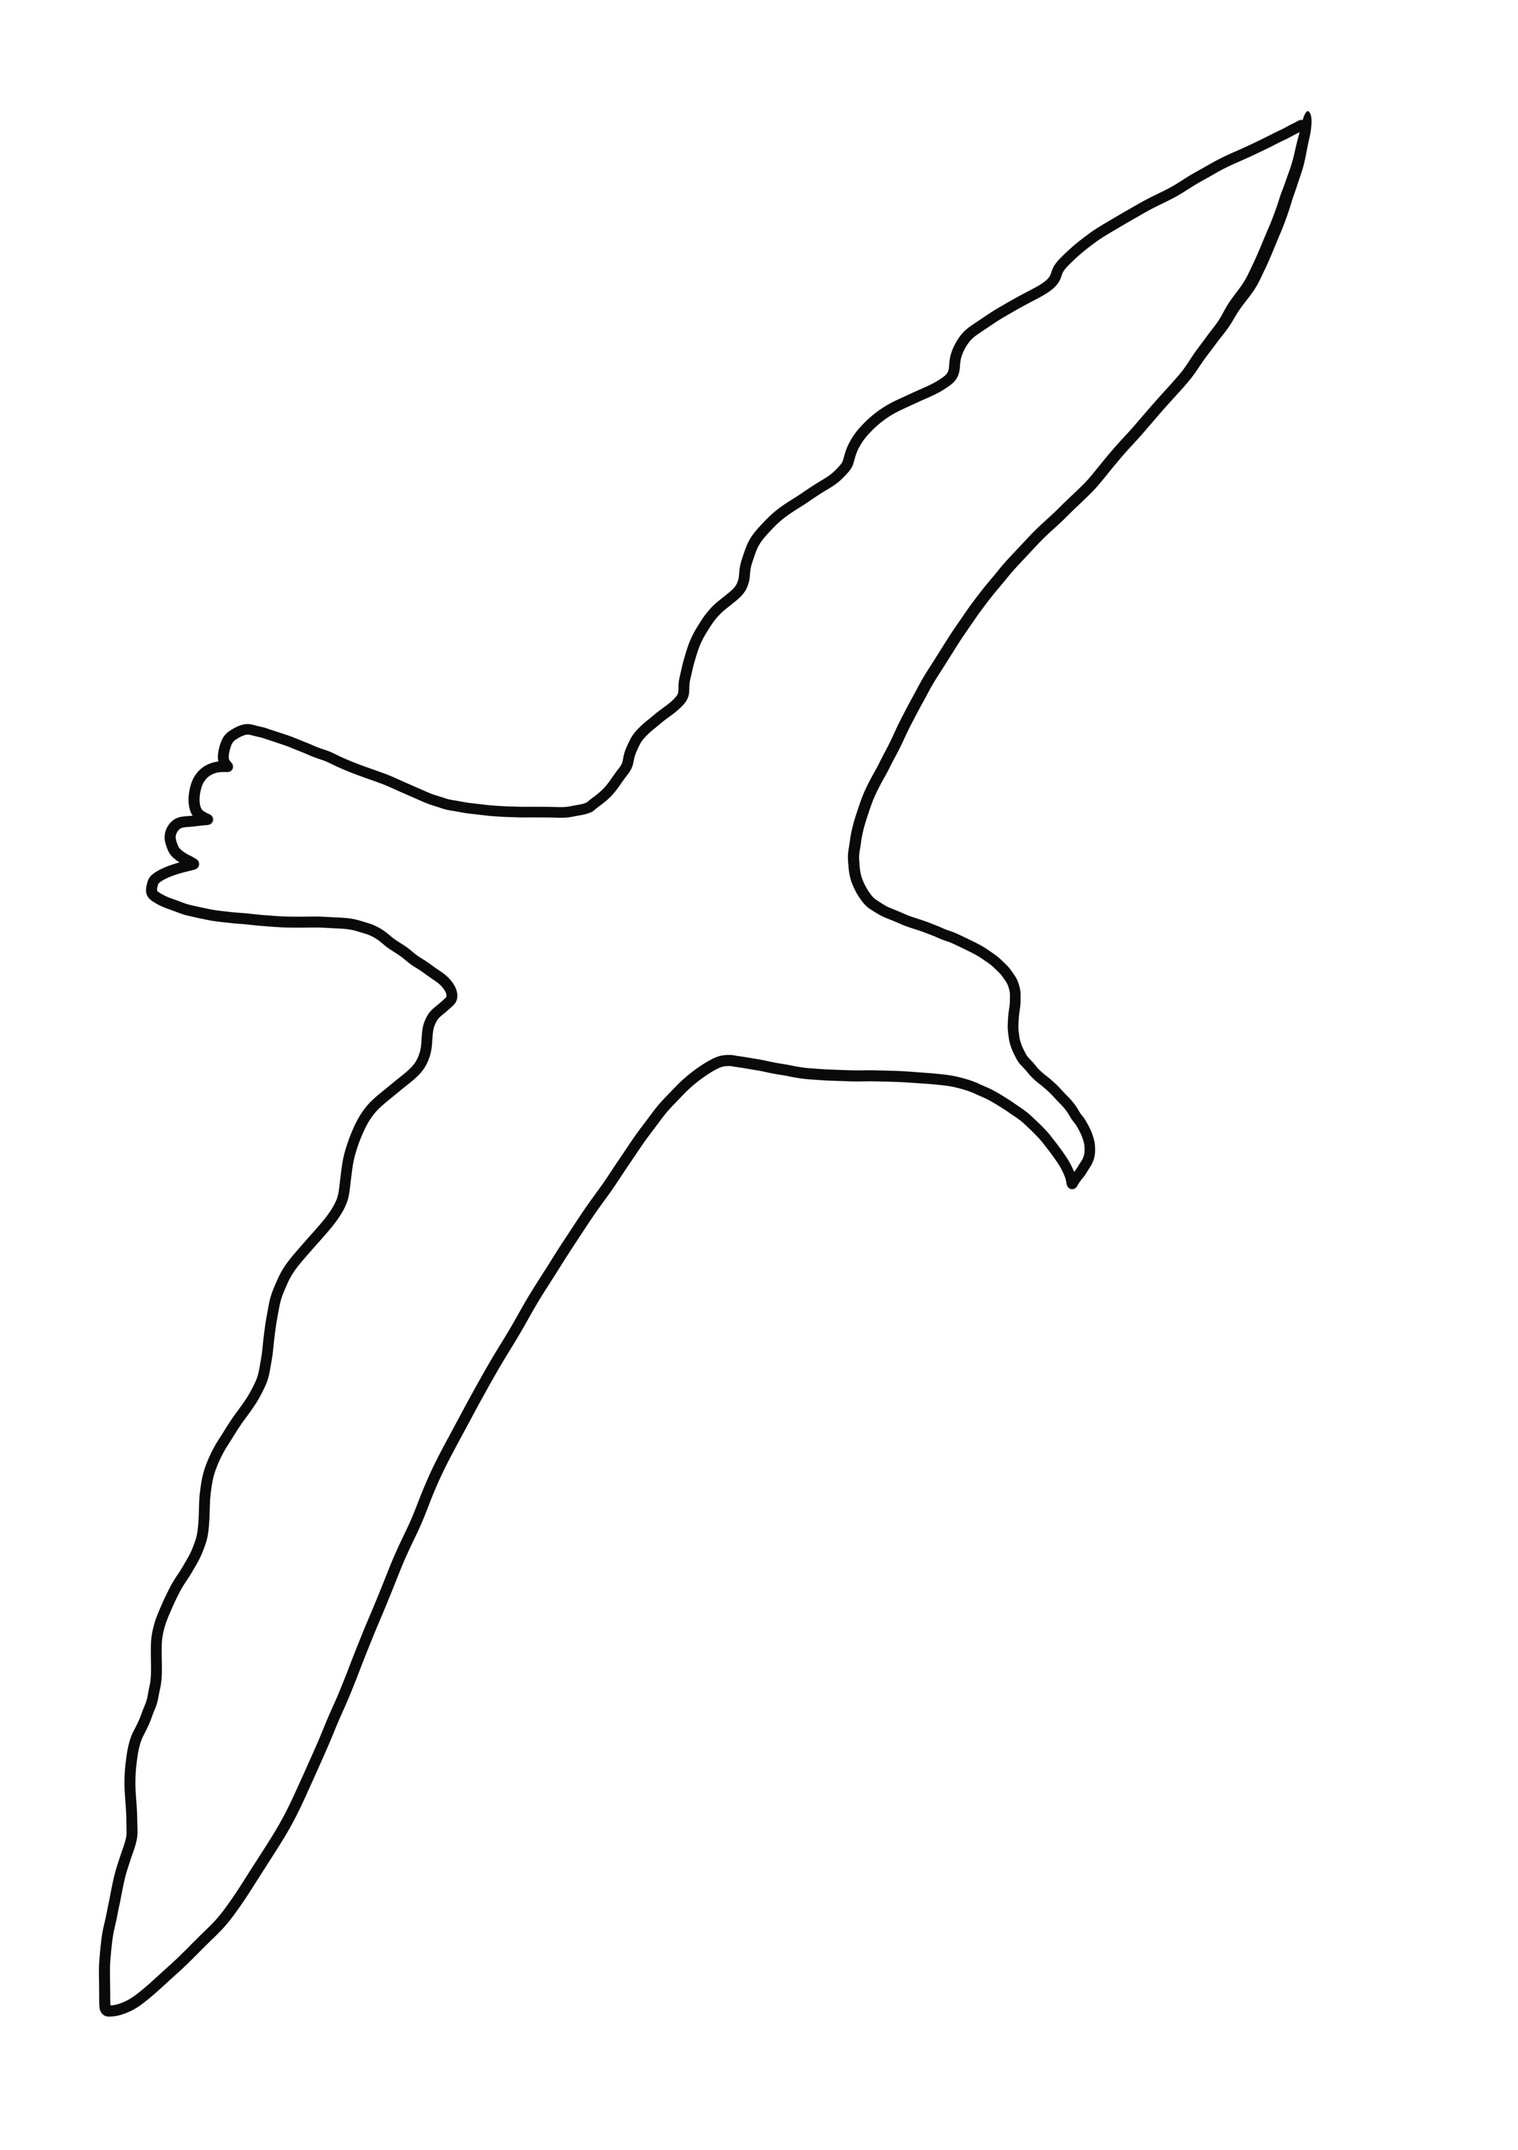 Albatross silhouette coloring page